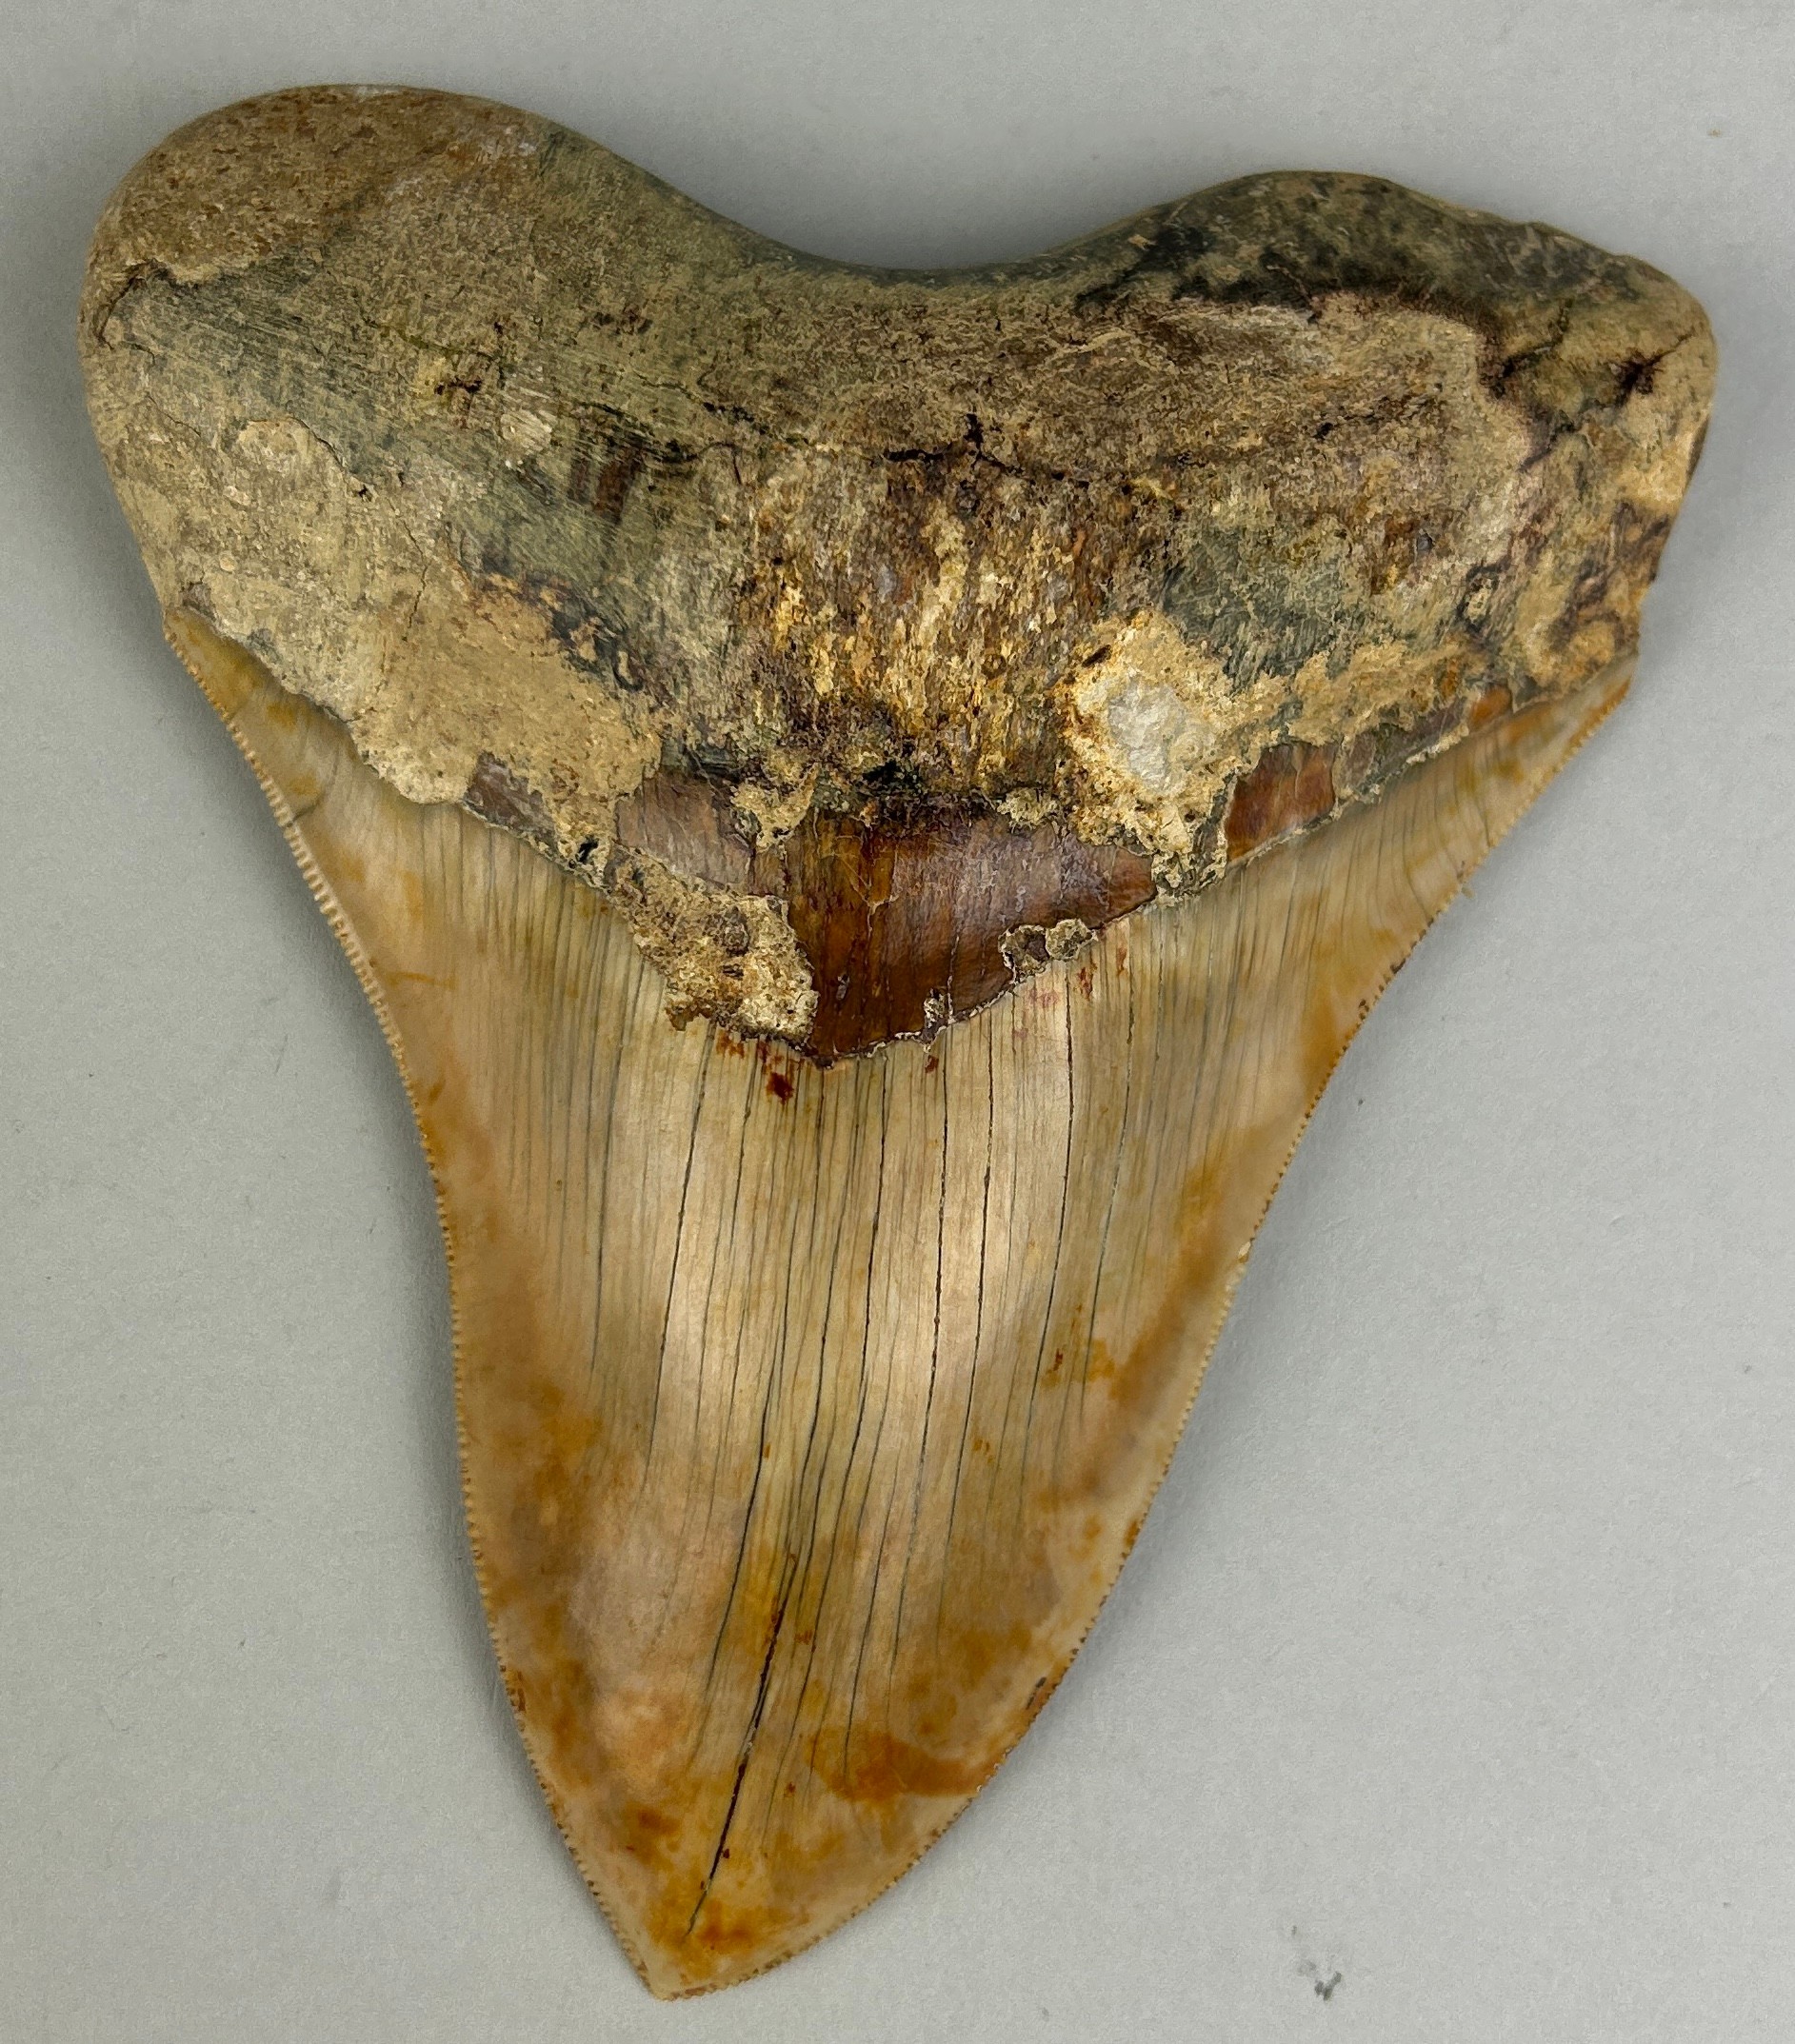 A VERY LARGE MEGALODON SHARK TOOTH FOSSIL 13cm x 11cm From Java, Indonesia. Miocene circa 5-10